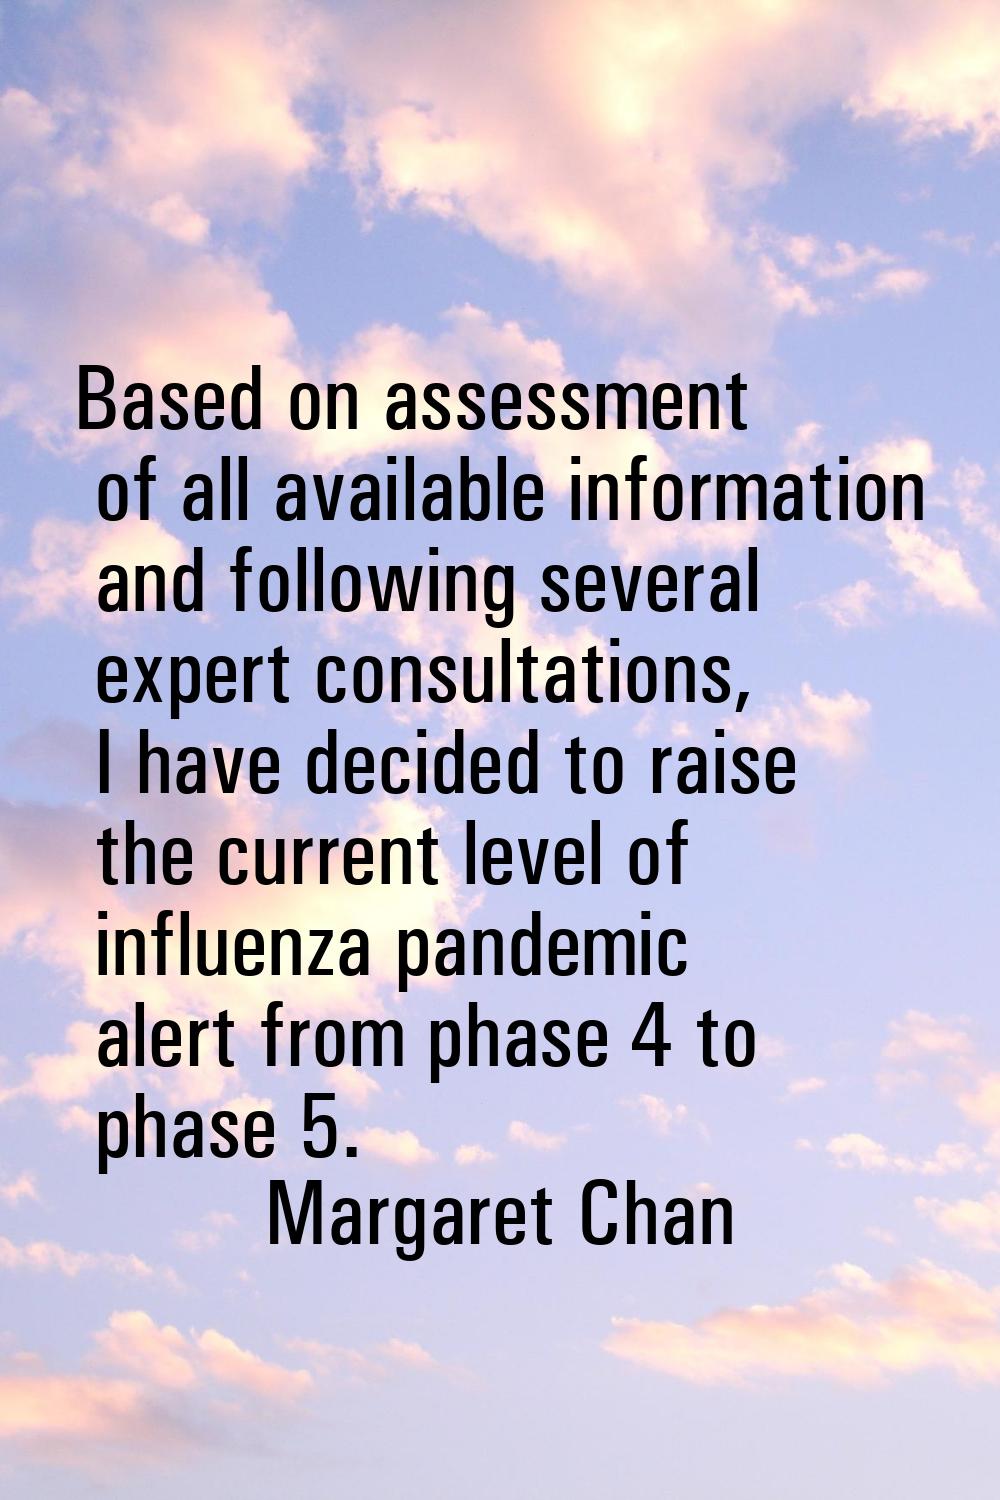 Based on assessment of all available information and following several expert consultations, I have